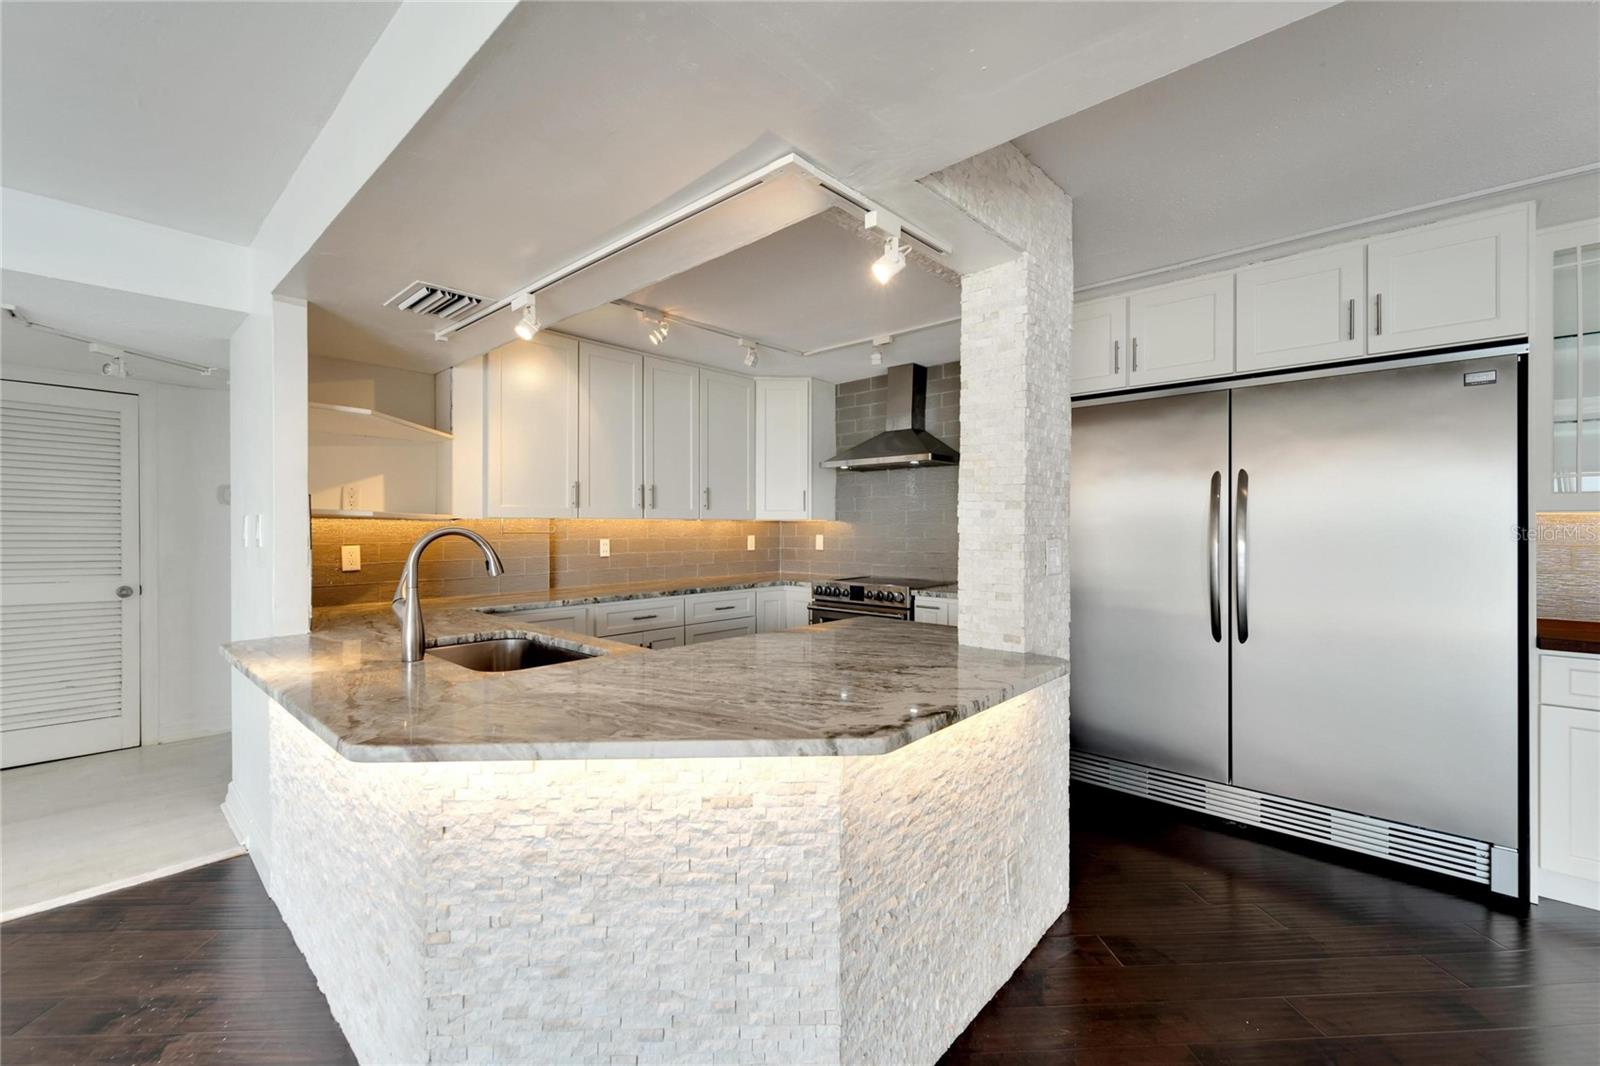 BEAUTIFULLY REDONE WITH ALL NEW COUNTERTOPS, CABINETRY, MODERN ACCENTS AND APPLIANCES